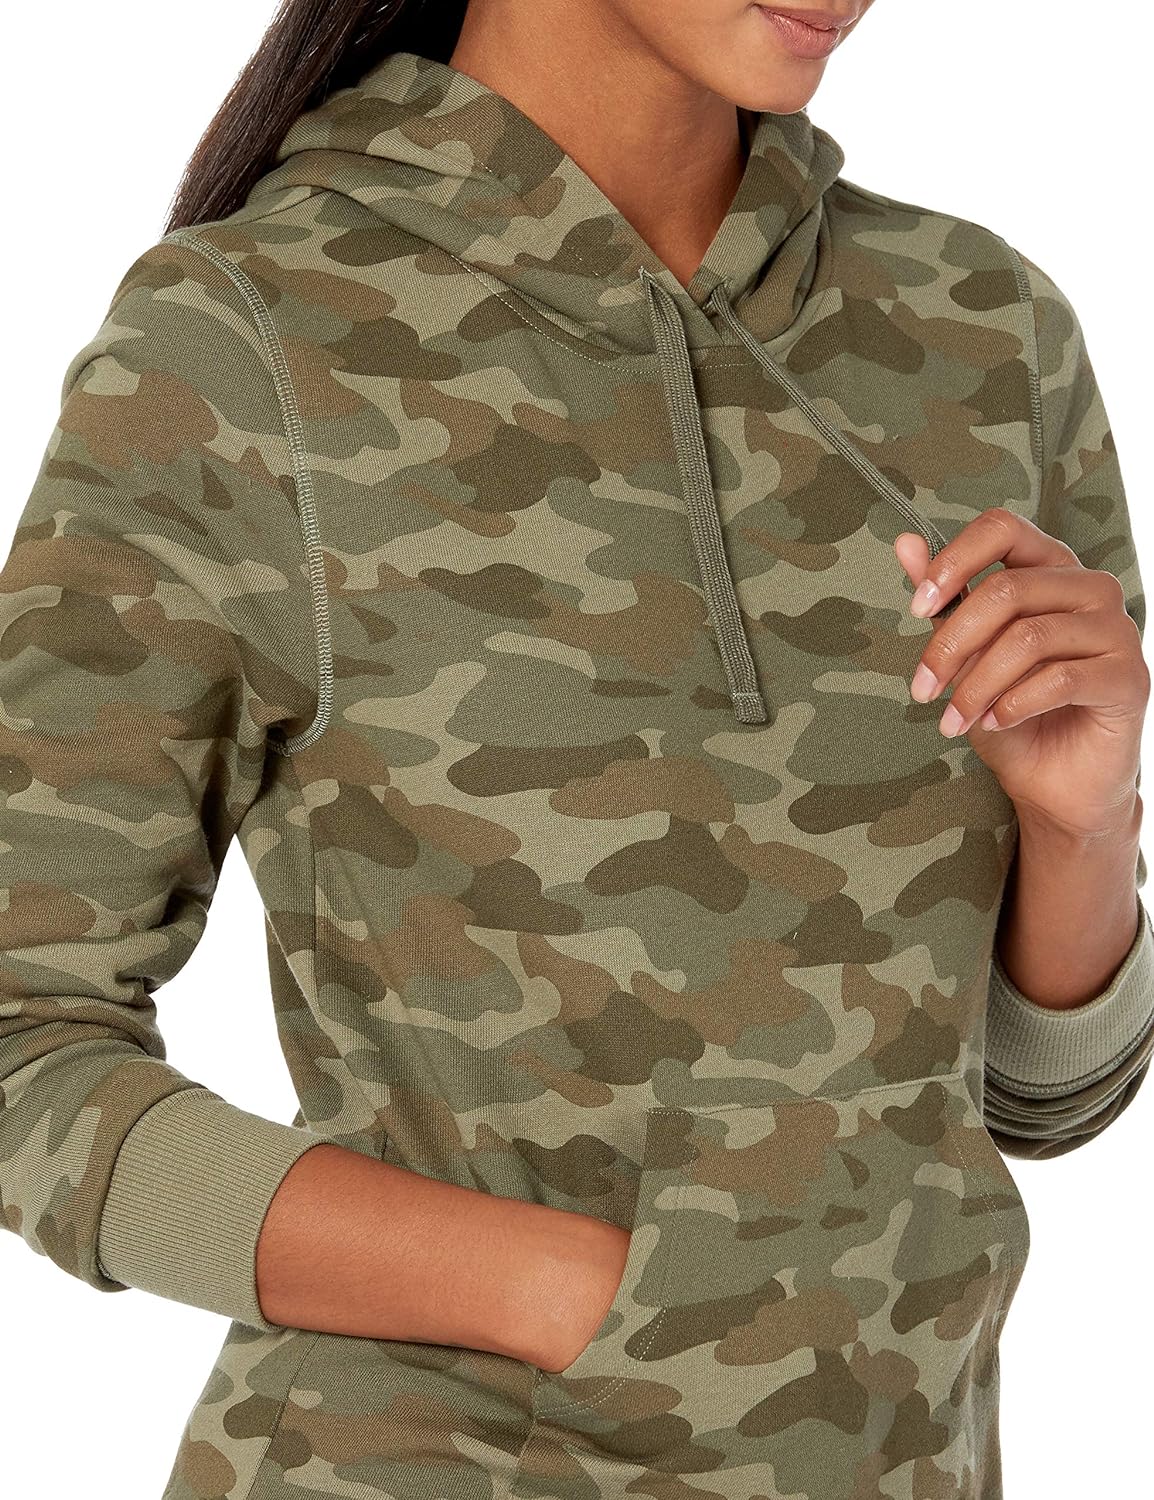 Amazon Essentials Womens Fleece Pullover Hoodie Available  - New York - Albany ID1538218 3